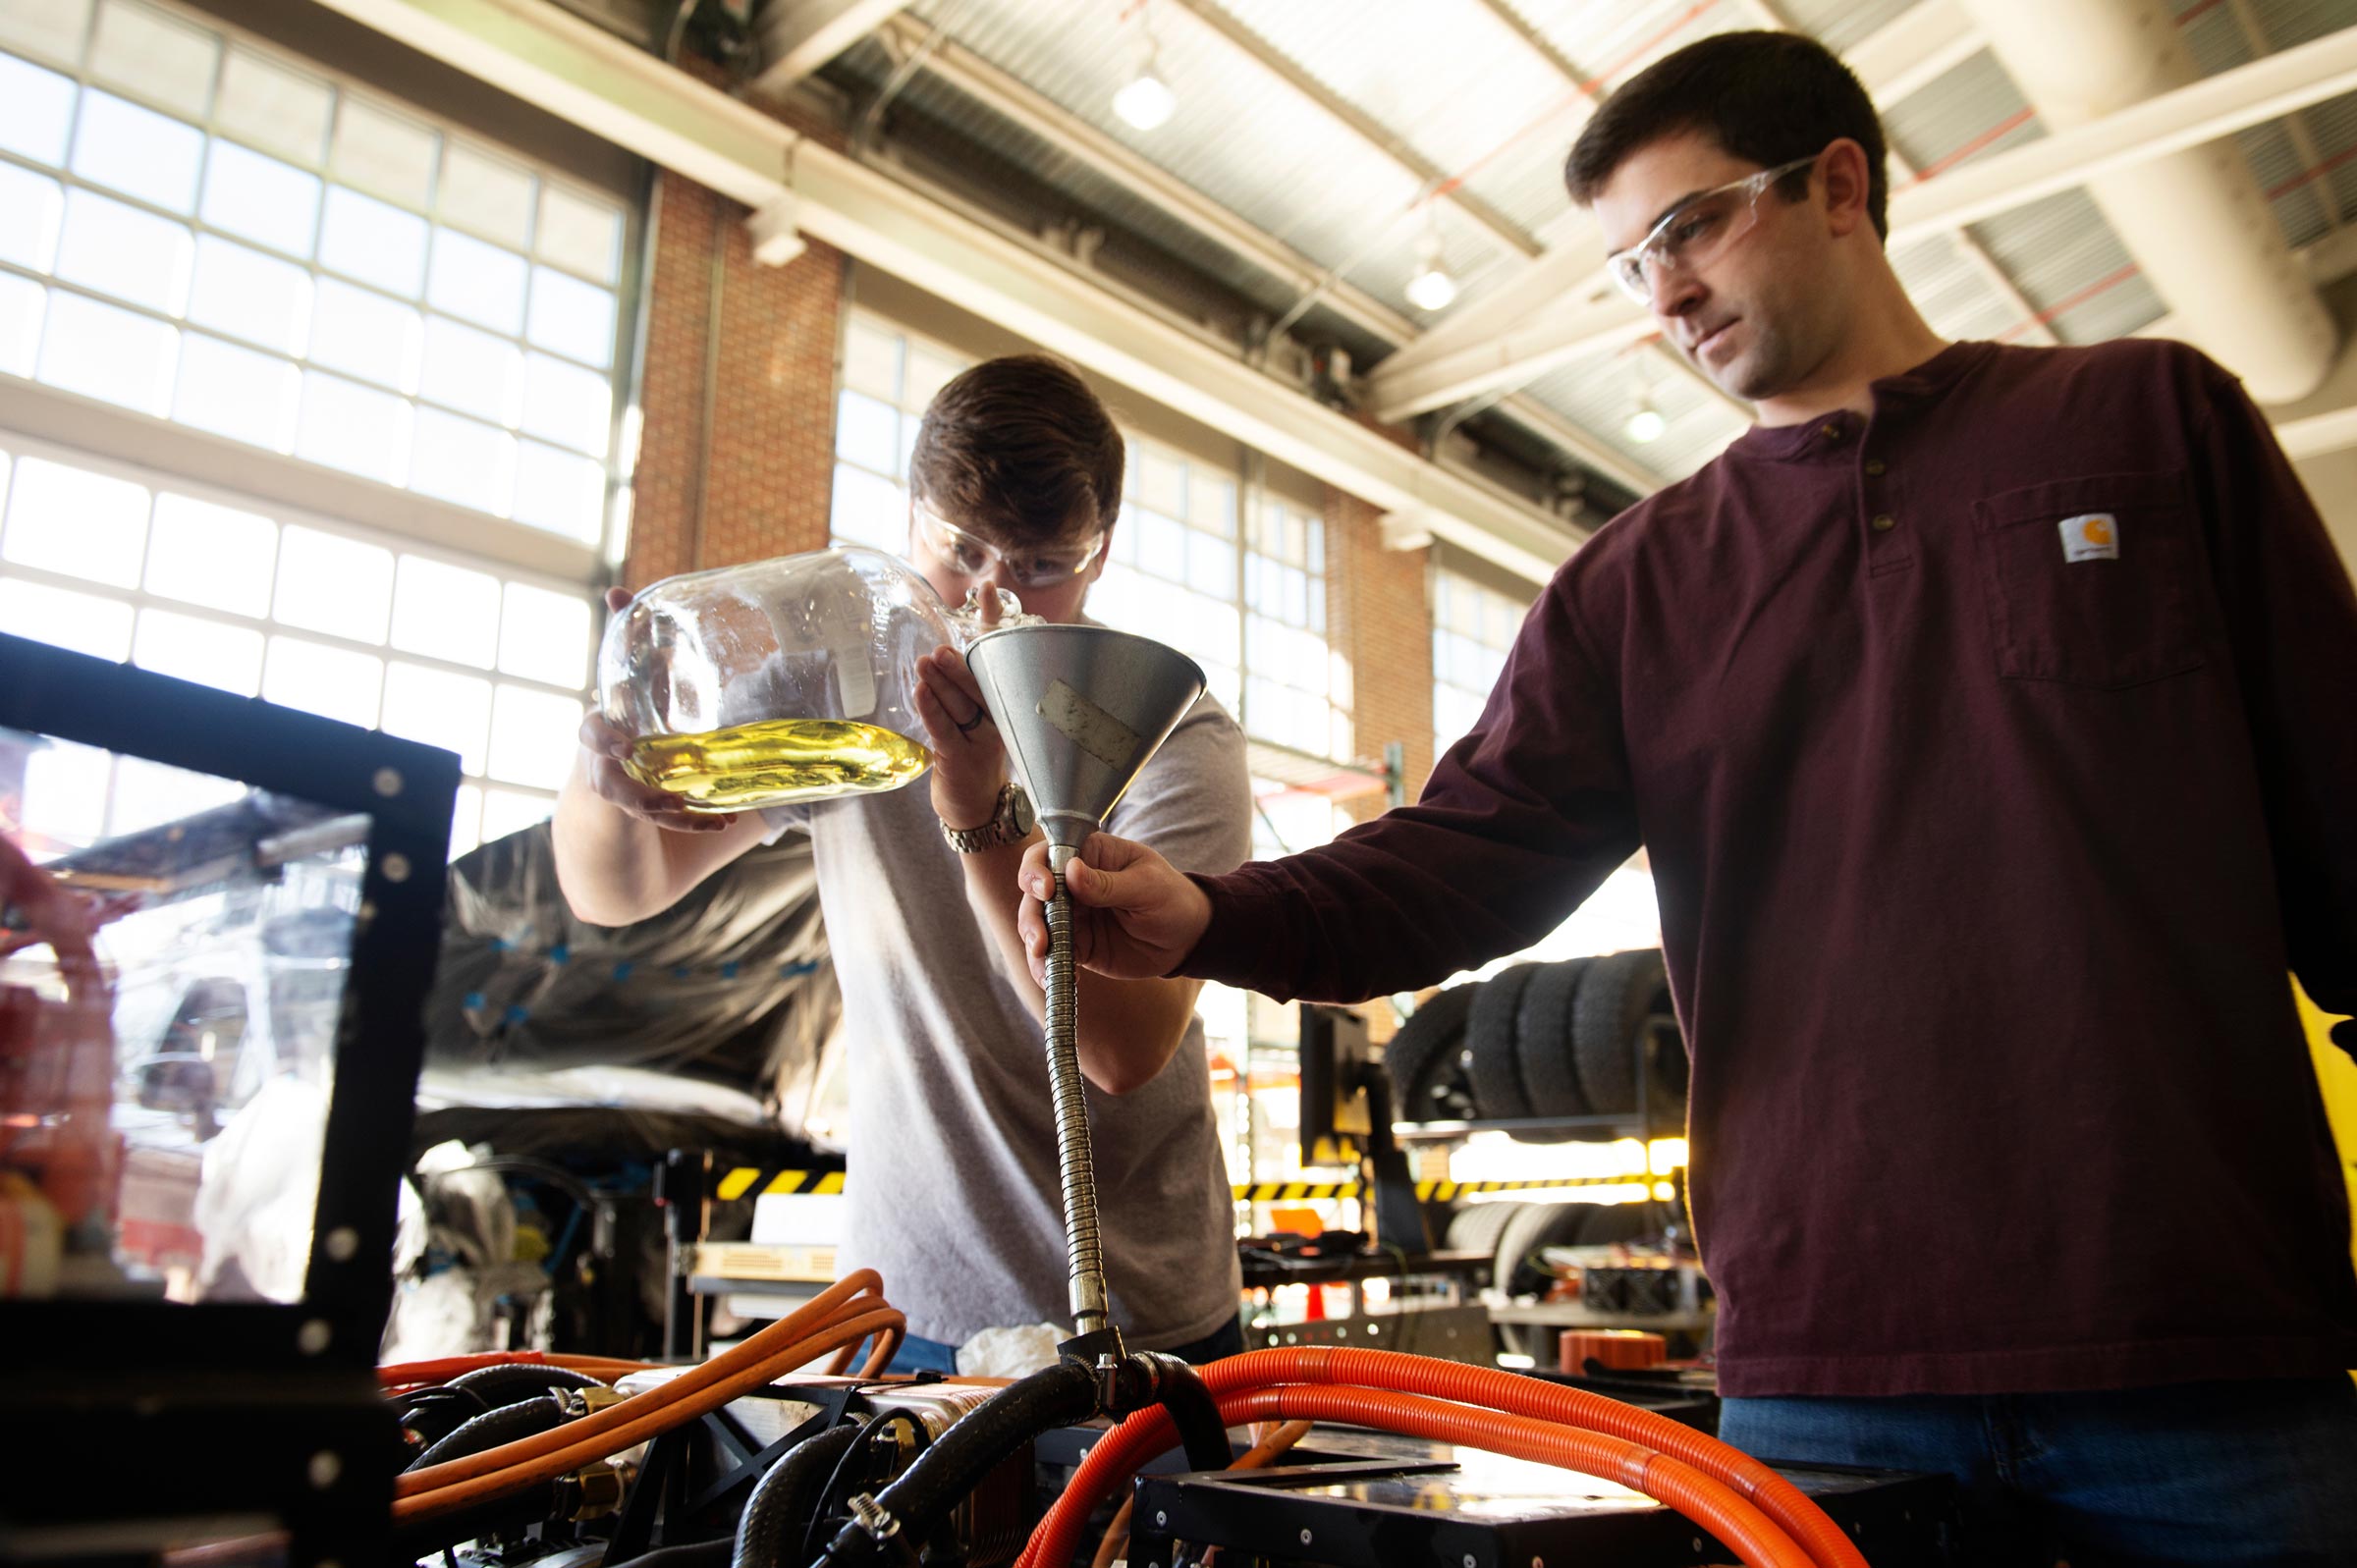 Chad Leachman, left, a graduate student in mechanical engineering from Ruston, Louisiana, tops off the Halo Car's power line drive opticool fluid. Assisting is Andrew LeClair, research engineer II at MSU's Center for Advanced Vehicular Systems.